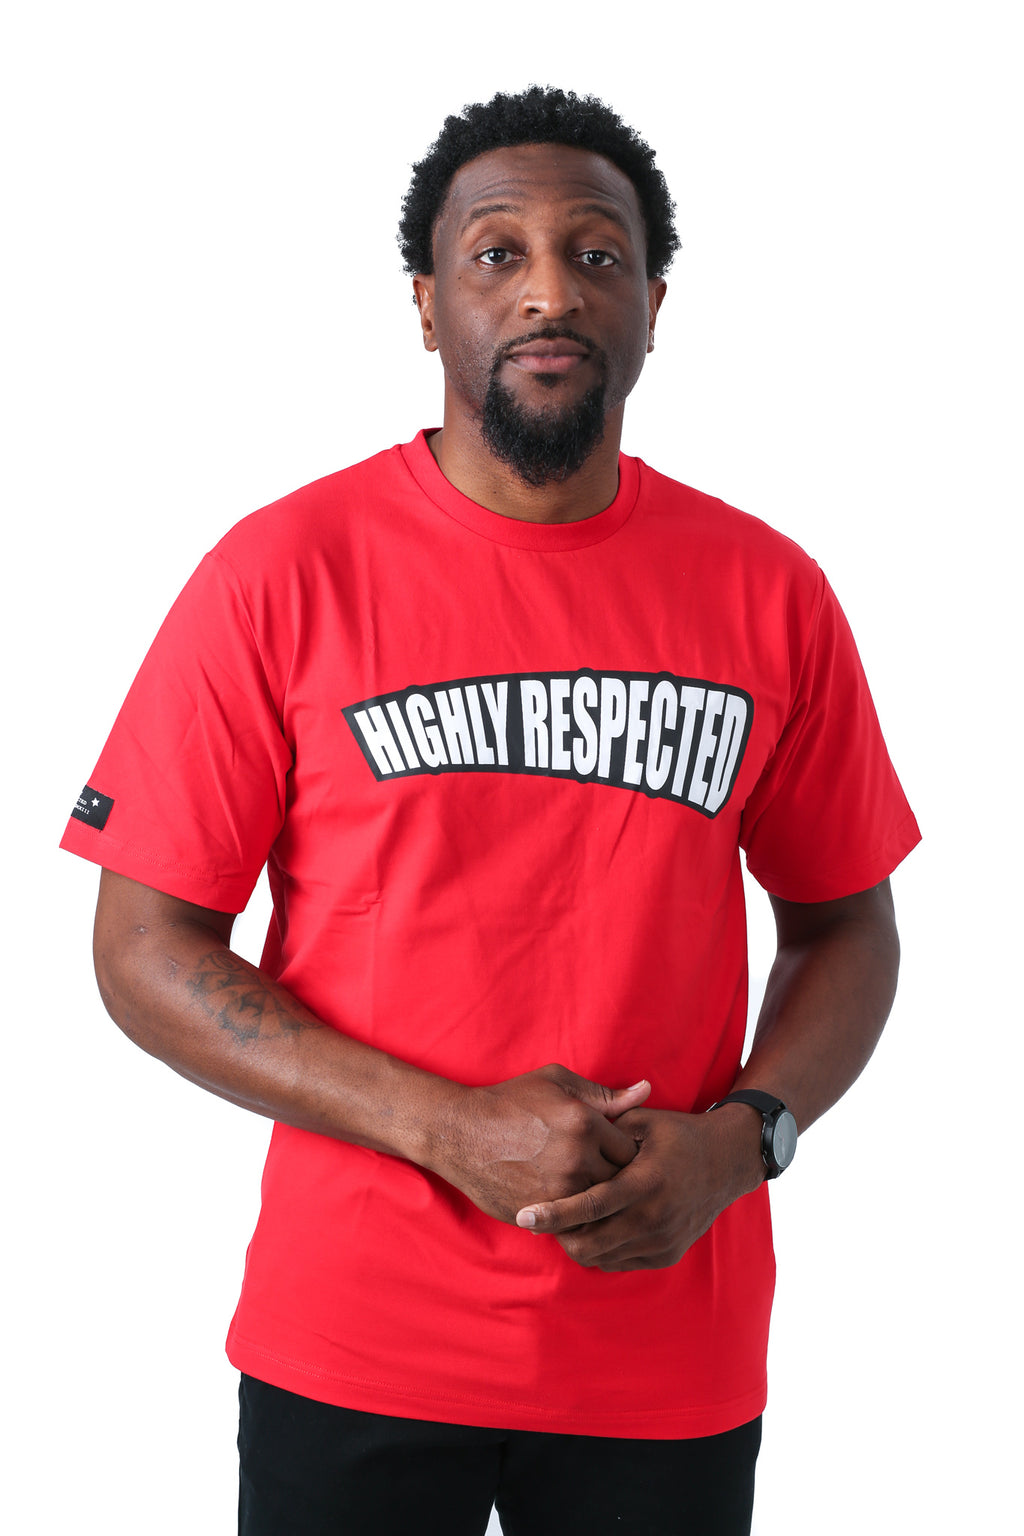 Highly Respected Tee